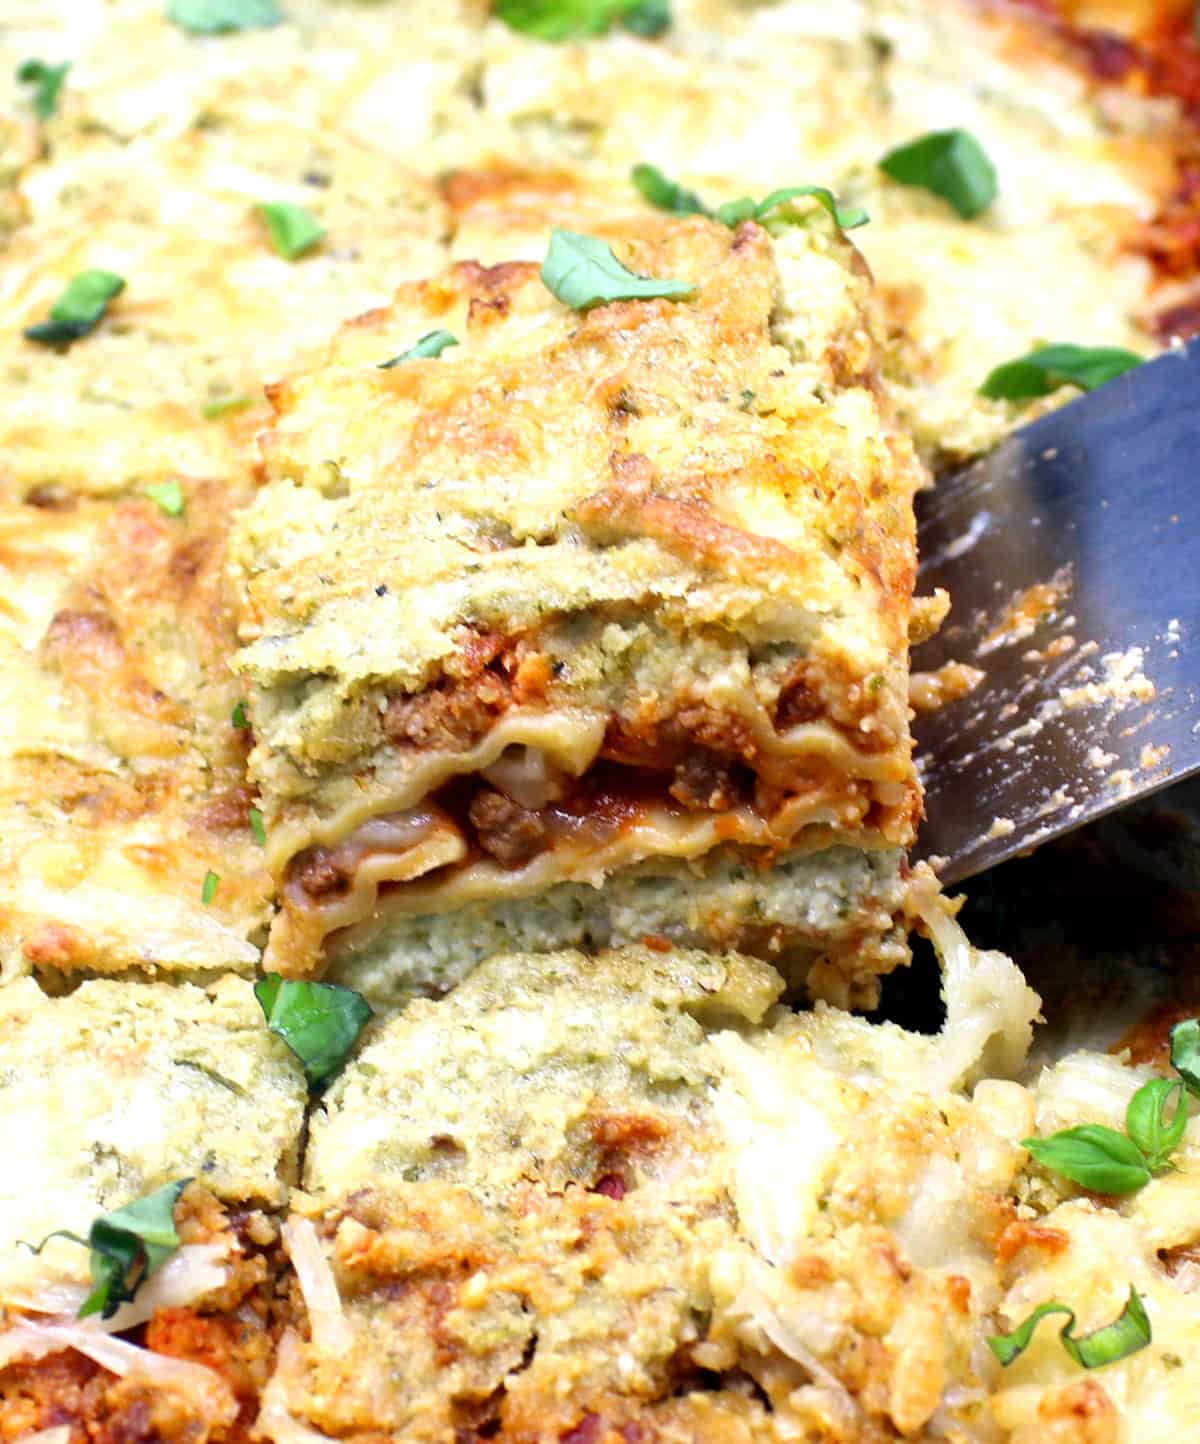 Vegan lasagna being lifted out of pan with spatula.